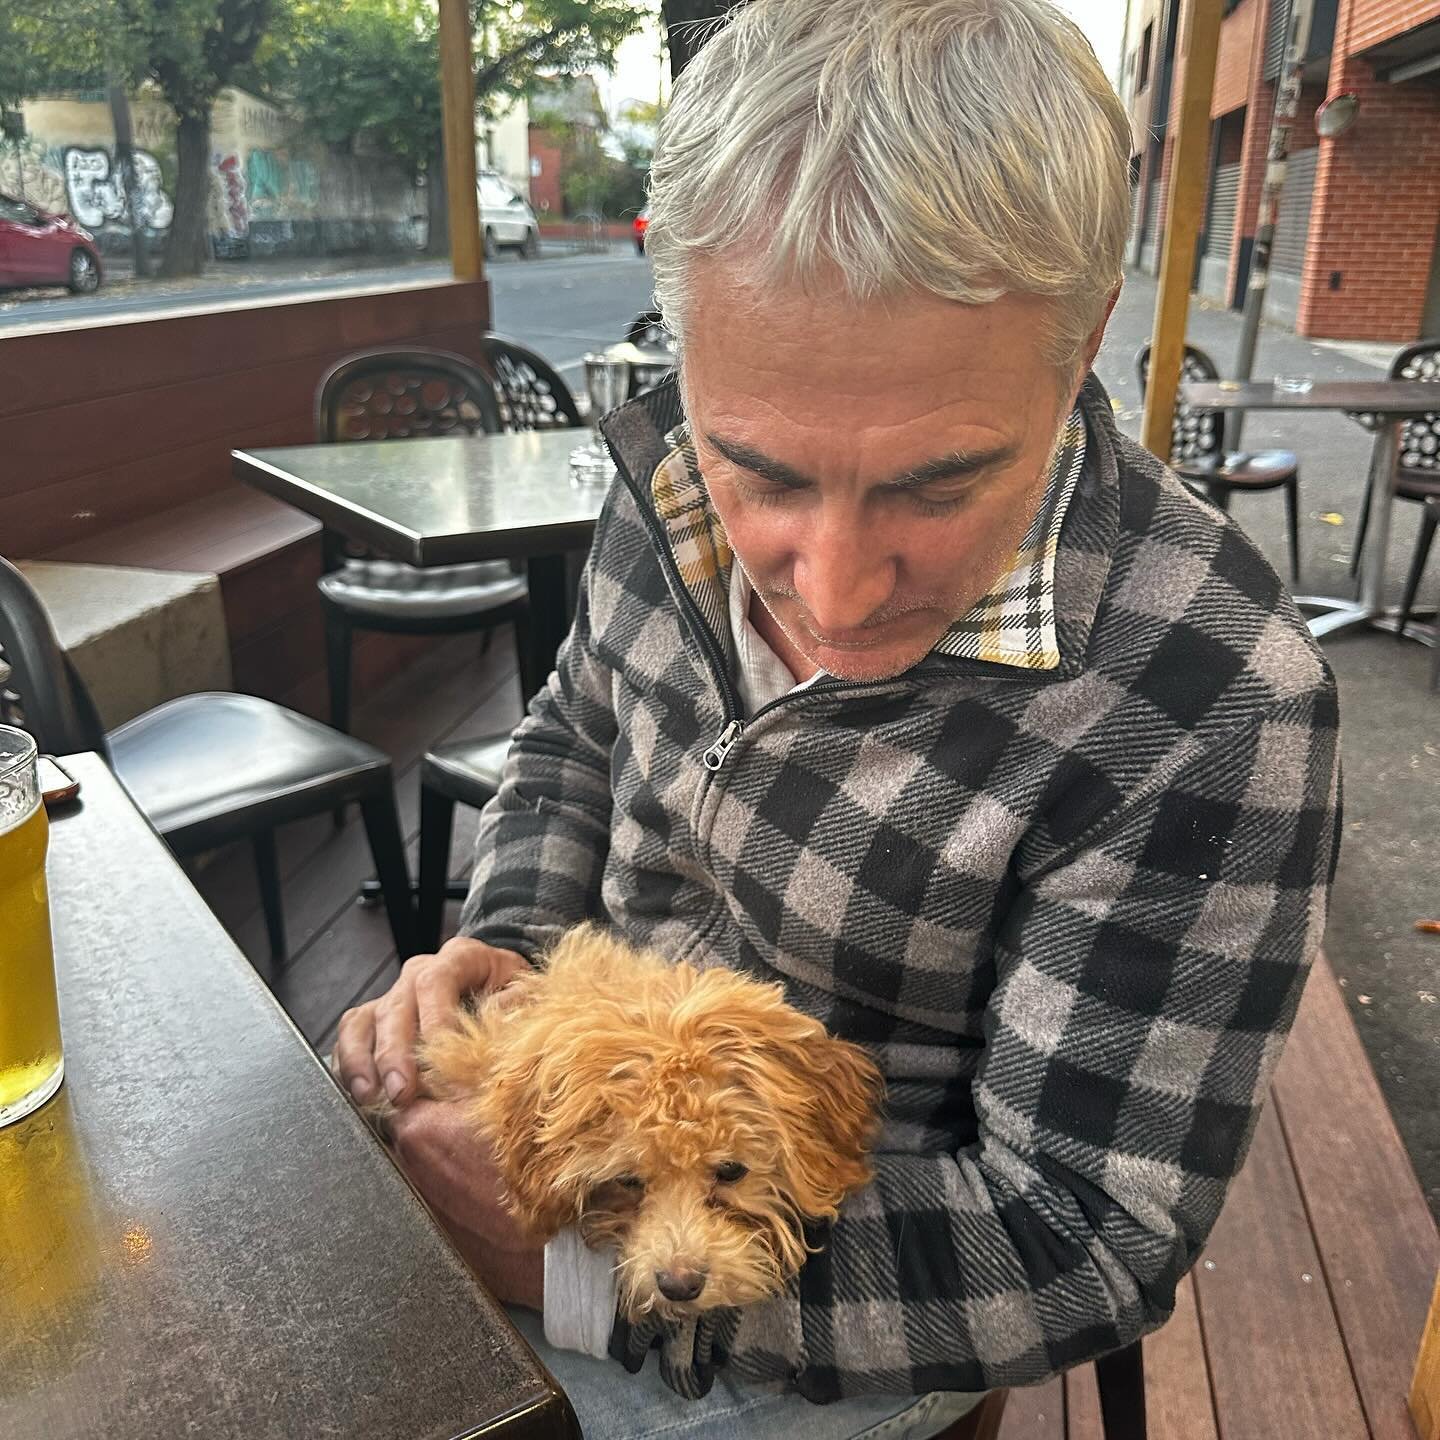 Pubs, puppies and love go hand in hand (and in paw) at the Union. 

Happy Saturday Fitzroy. See you legends later! 

.
.
.
.
.
.
.
.
.
.
.

#Fitzroy #Pub #DogFriendly #Melbourne